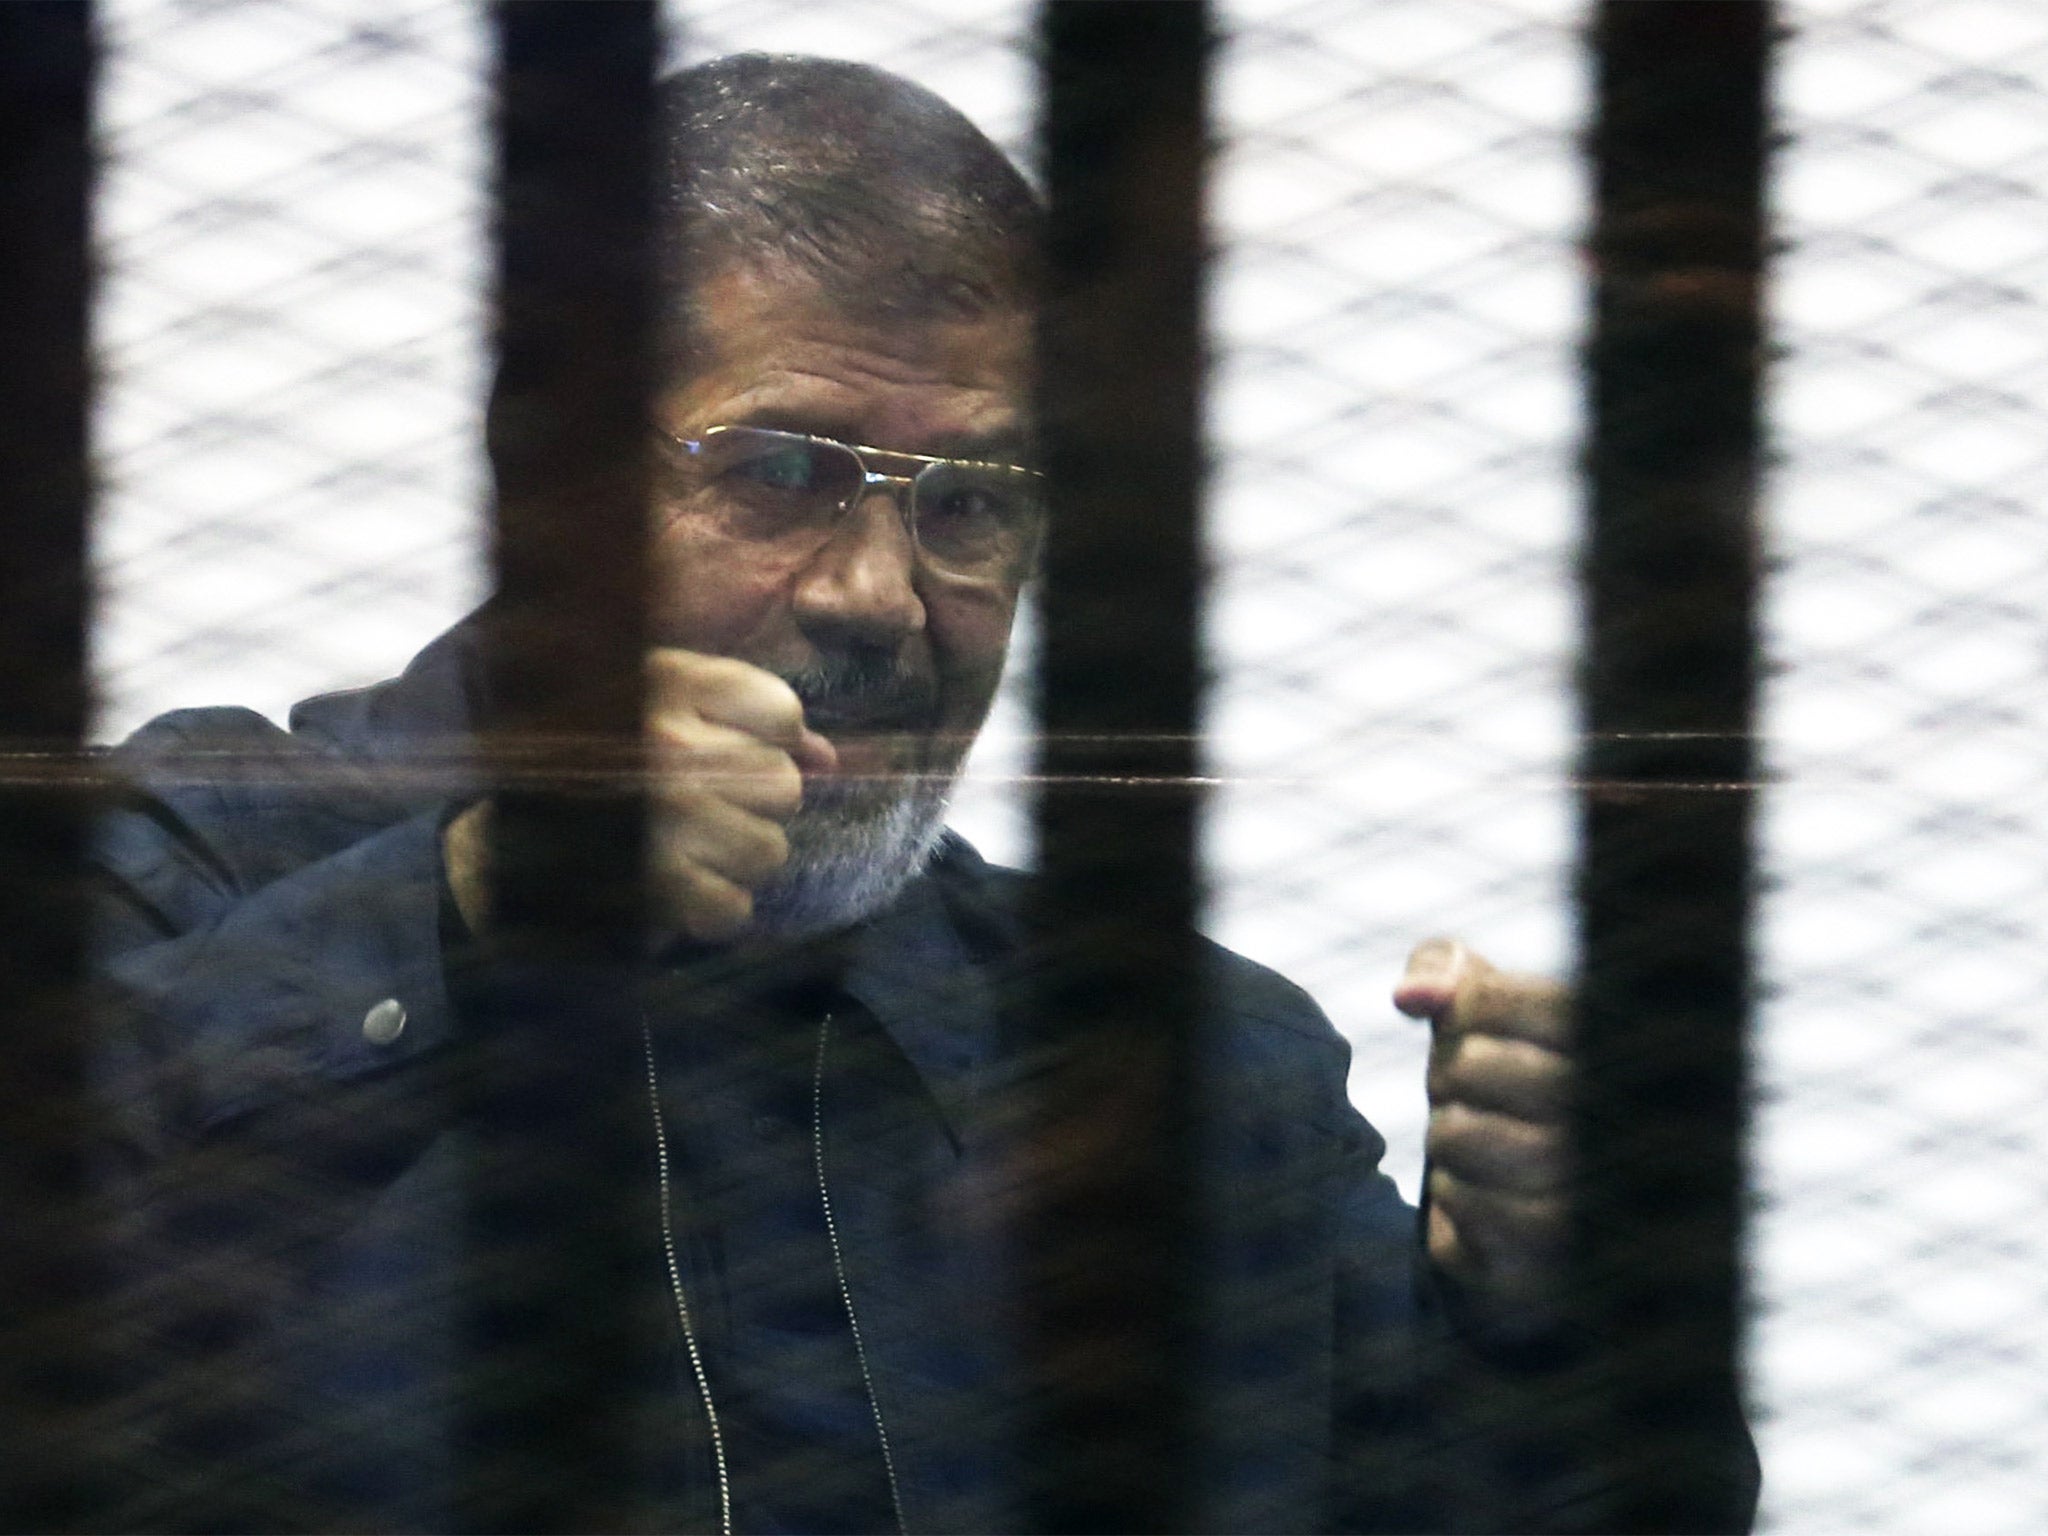 Ousted President Mohammed Morsi has been in prison since 2013